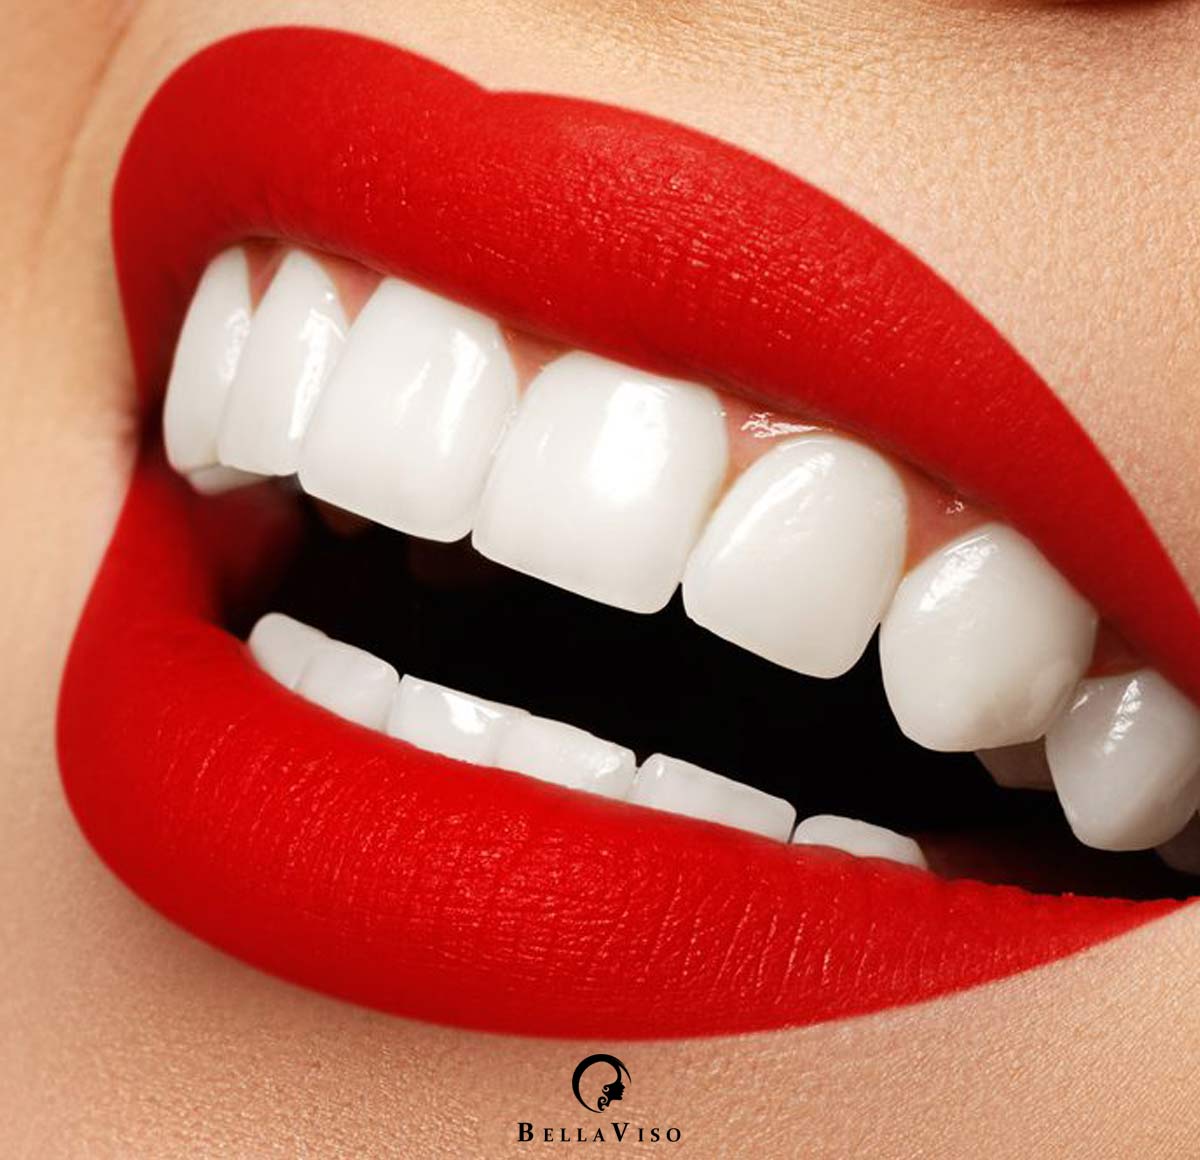 Best Dental Clinic Teeth Cleaning Prices in Dubai